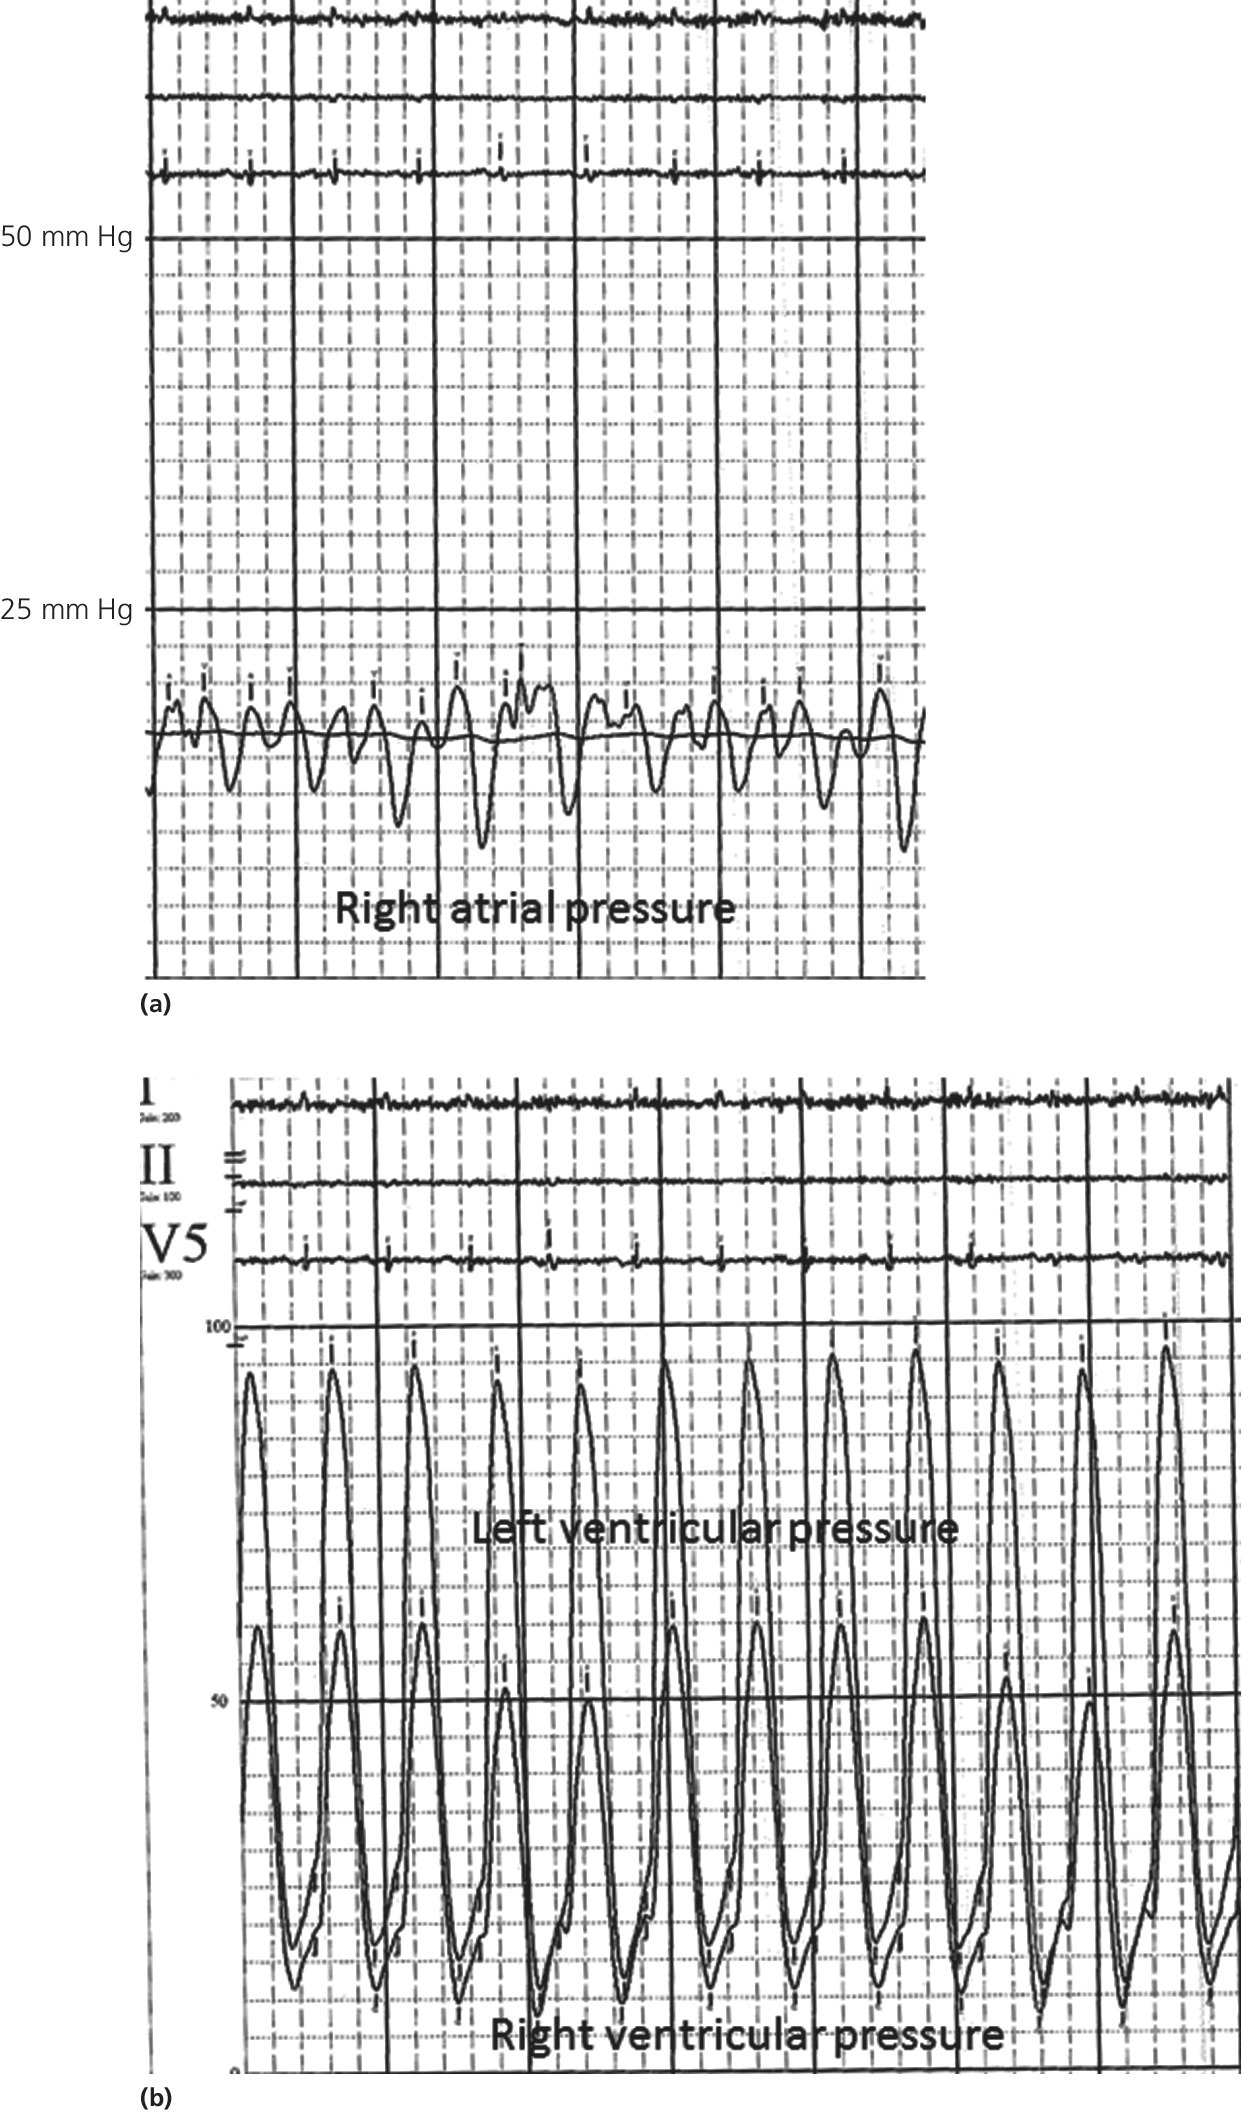 2 ECGs of pressure tracings from a patient with amyloidosis displaying right atrial pressure (top) and left ventricular pressure and right ventricular pressure (bottom).